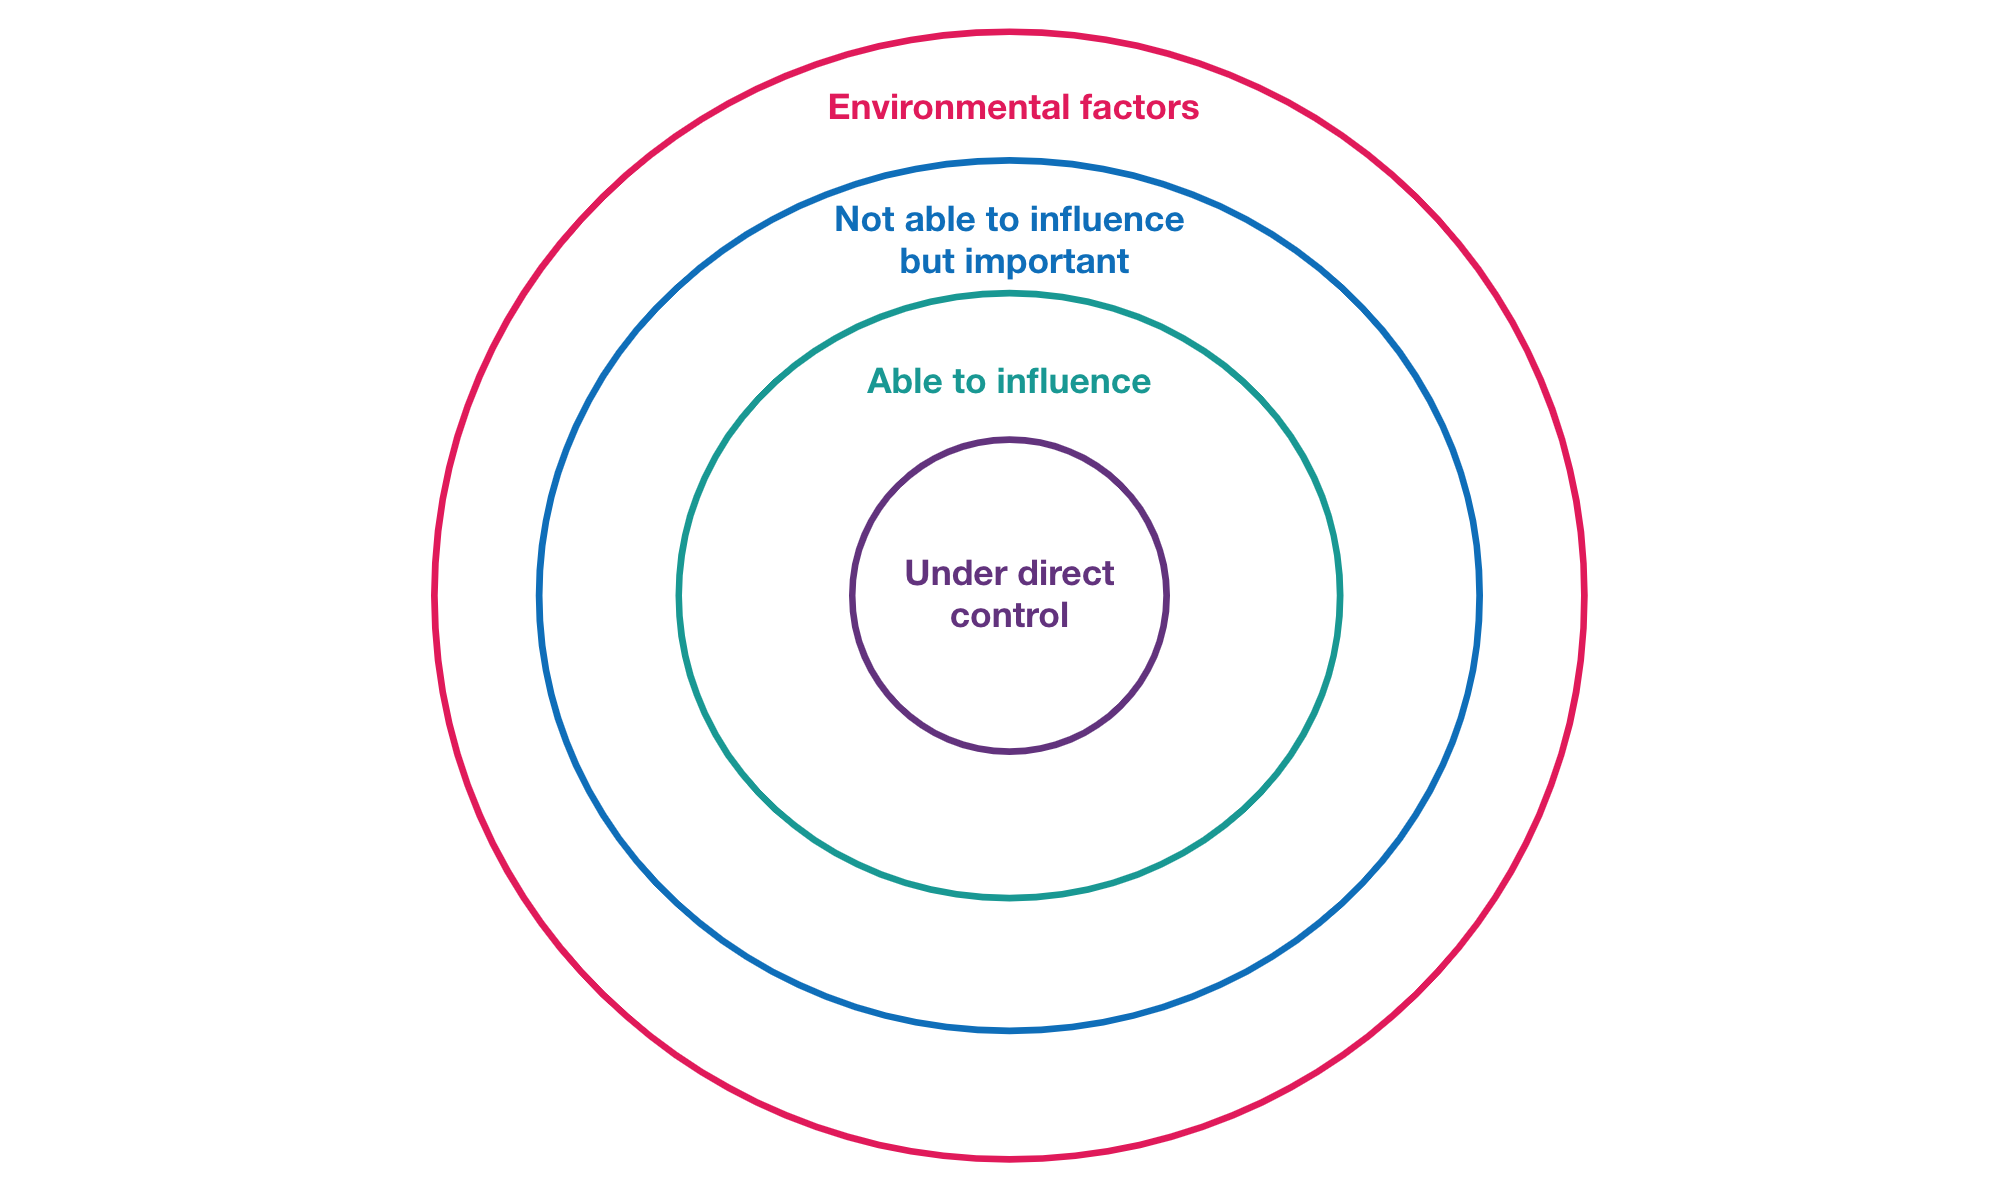 A context diagram comprising 4 concentric circles. From inner to outer: under direct control, able to influence, not able to influence and environmental factors.